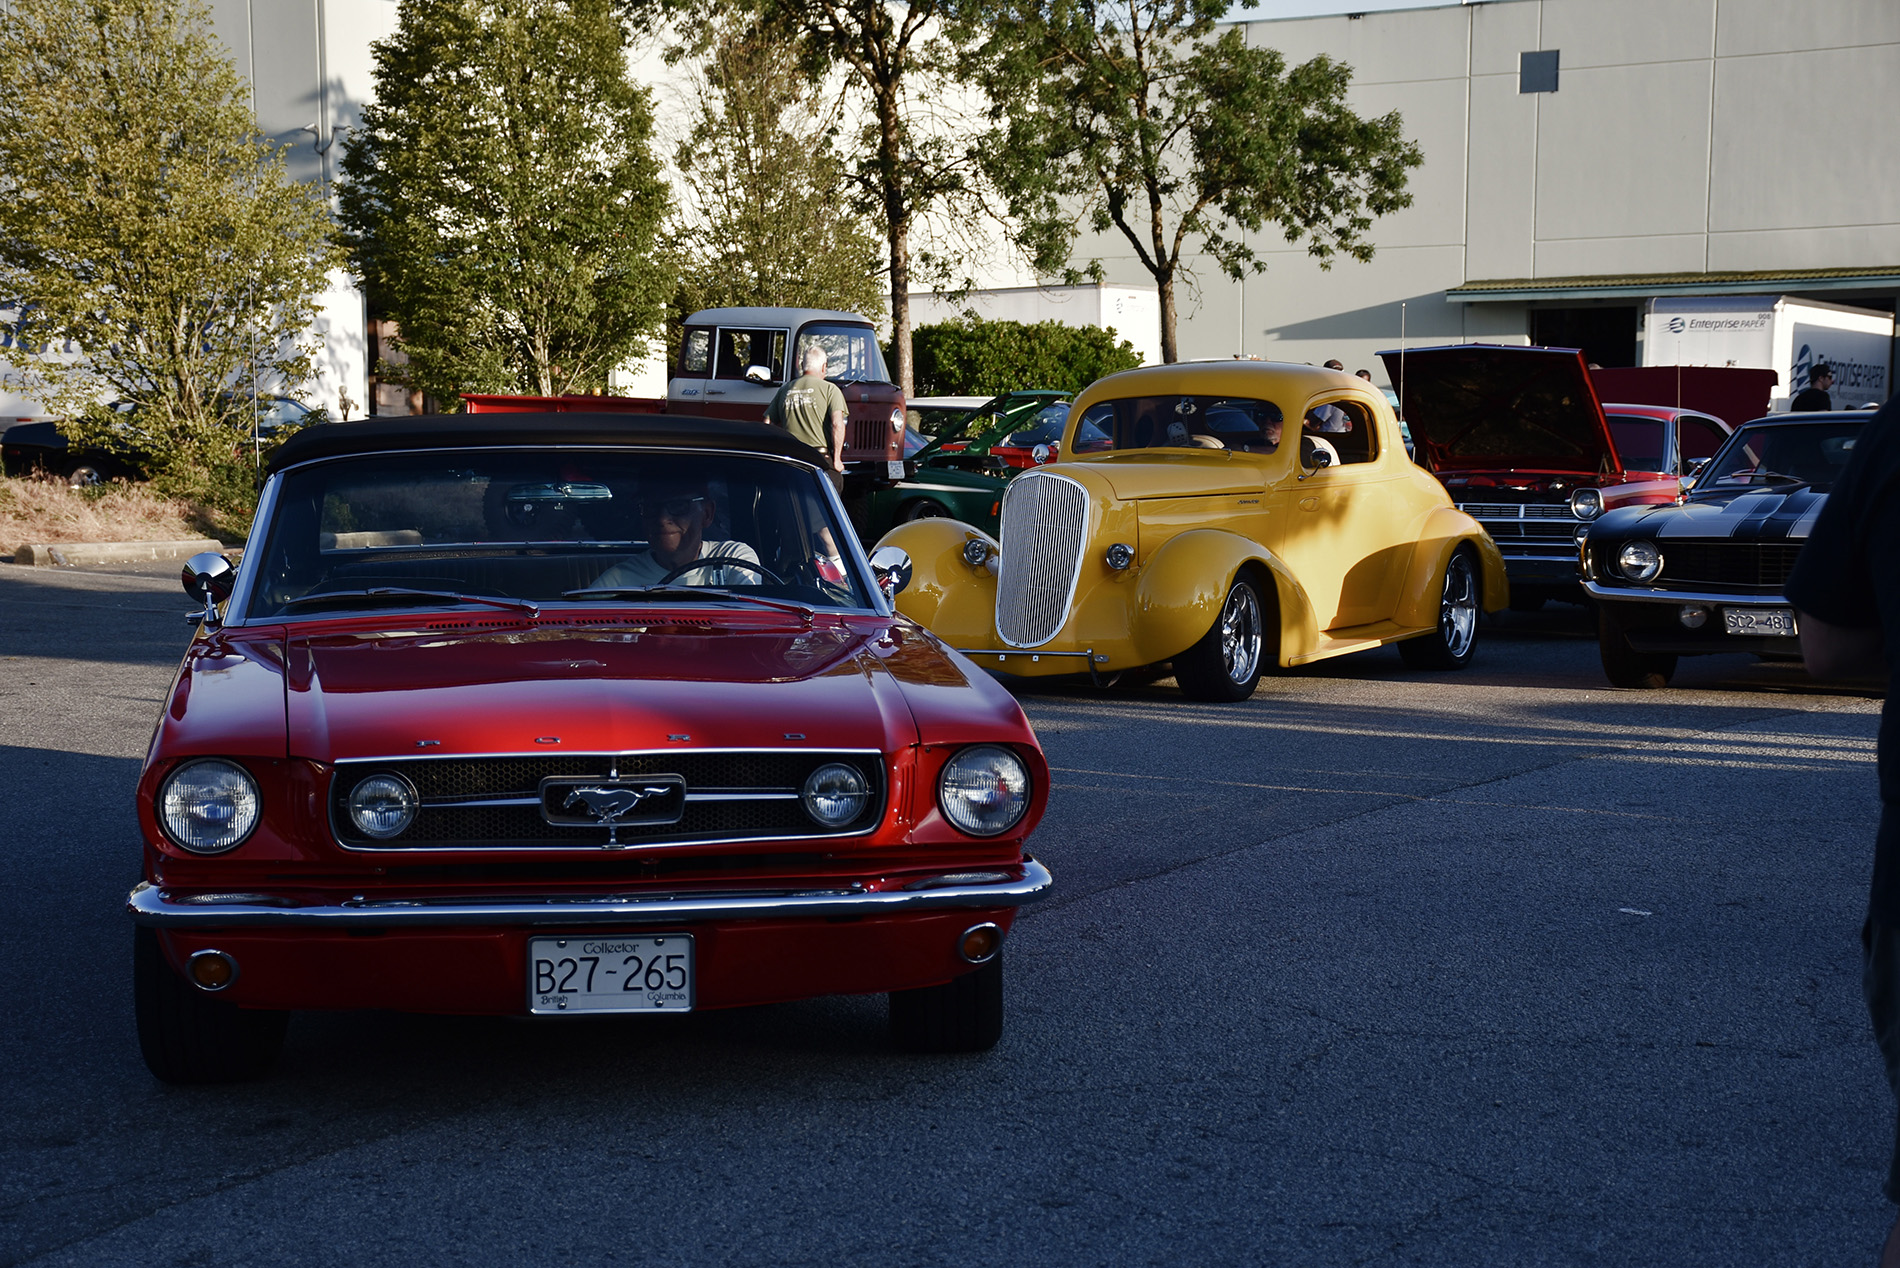 Imogen Pettyfer Vintage cars and coffee in Coquitlam